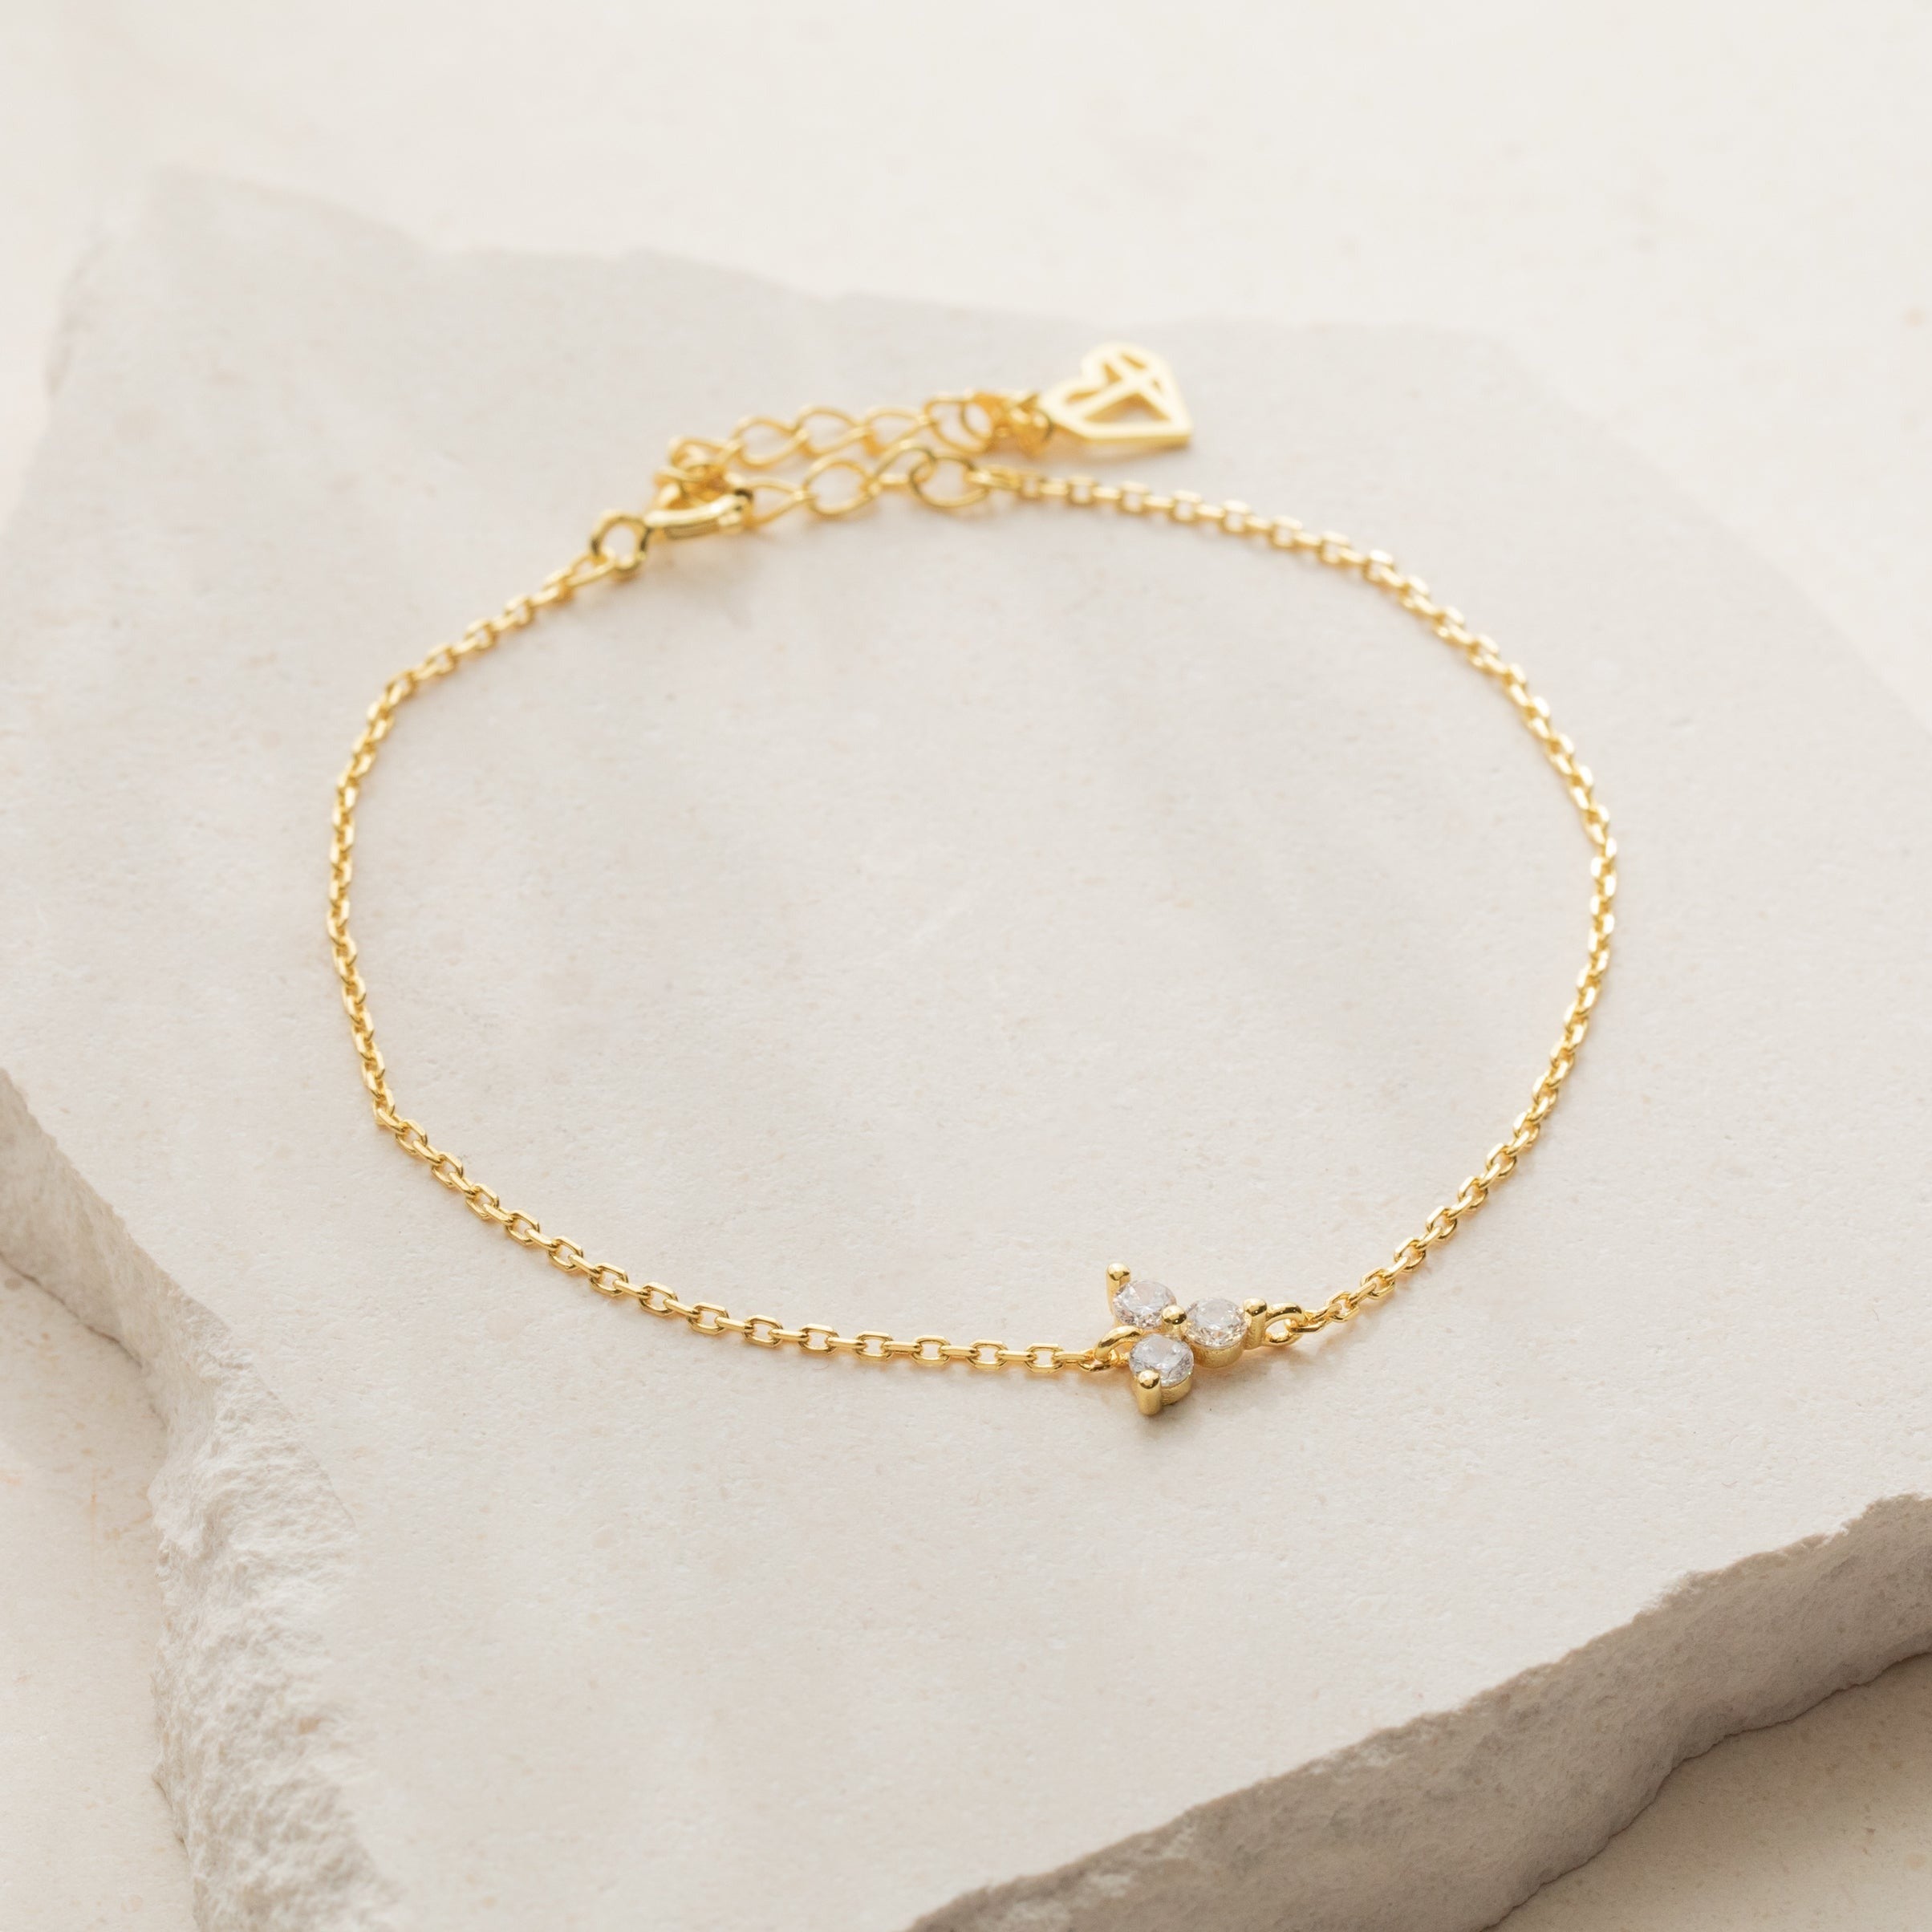 Buy Gold Plated Simple Roll Chain Bracelet Design Imitation Jewellery